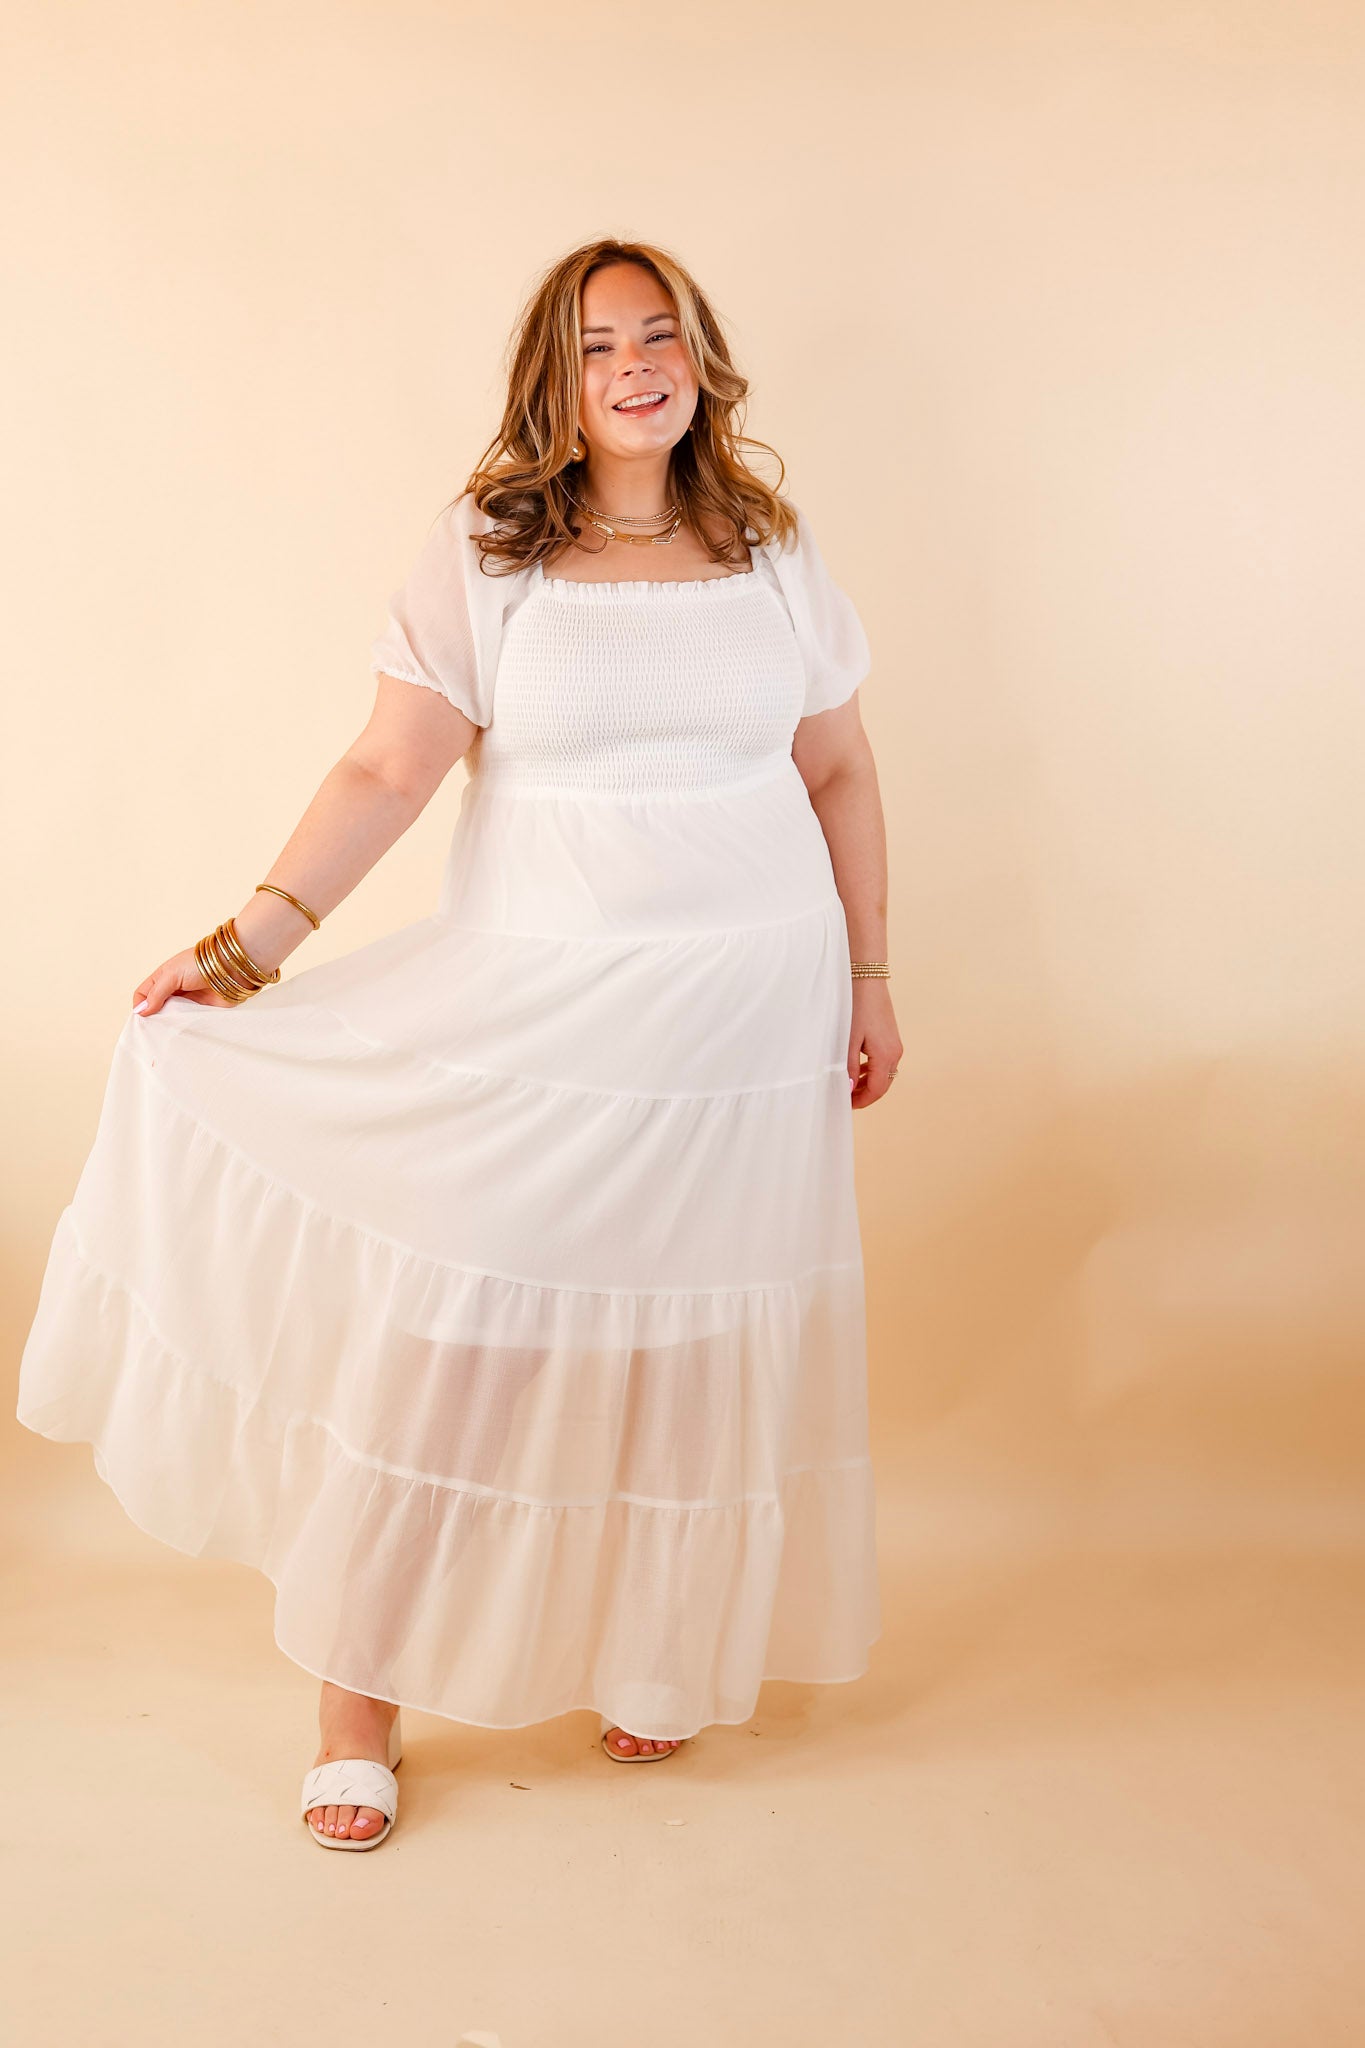 Honeysuckle Love Tiered Maxi Dress with Smocked Bodice in Ivory - Giddy Up Glamour Boutique